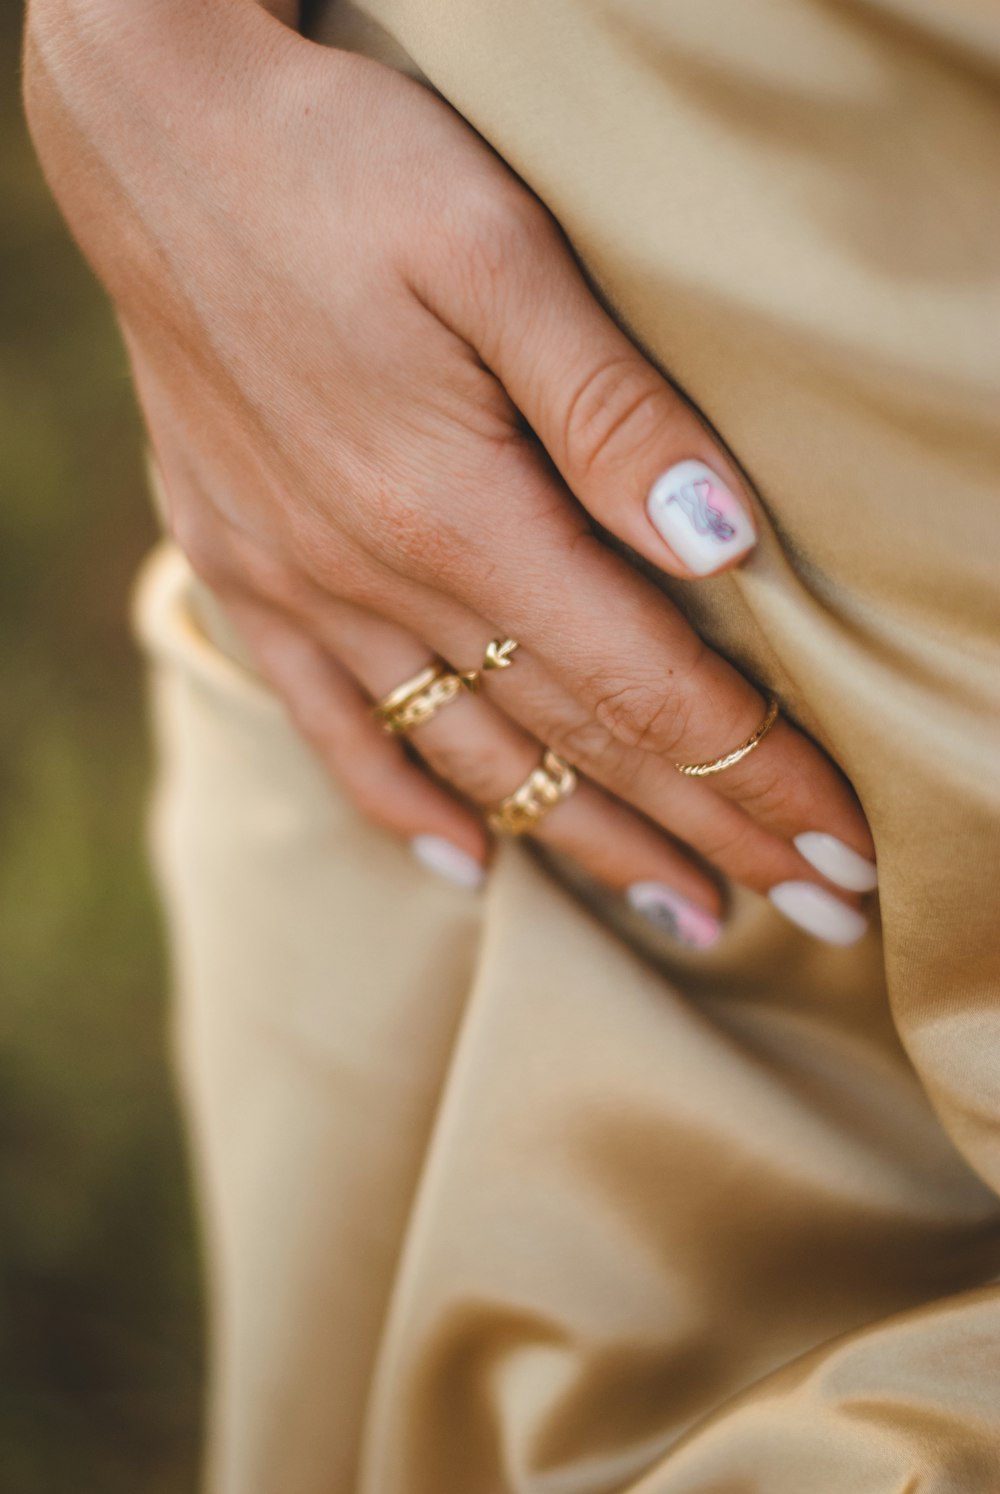 person wearing gold ring with blue stone